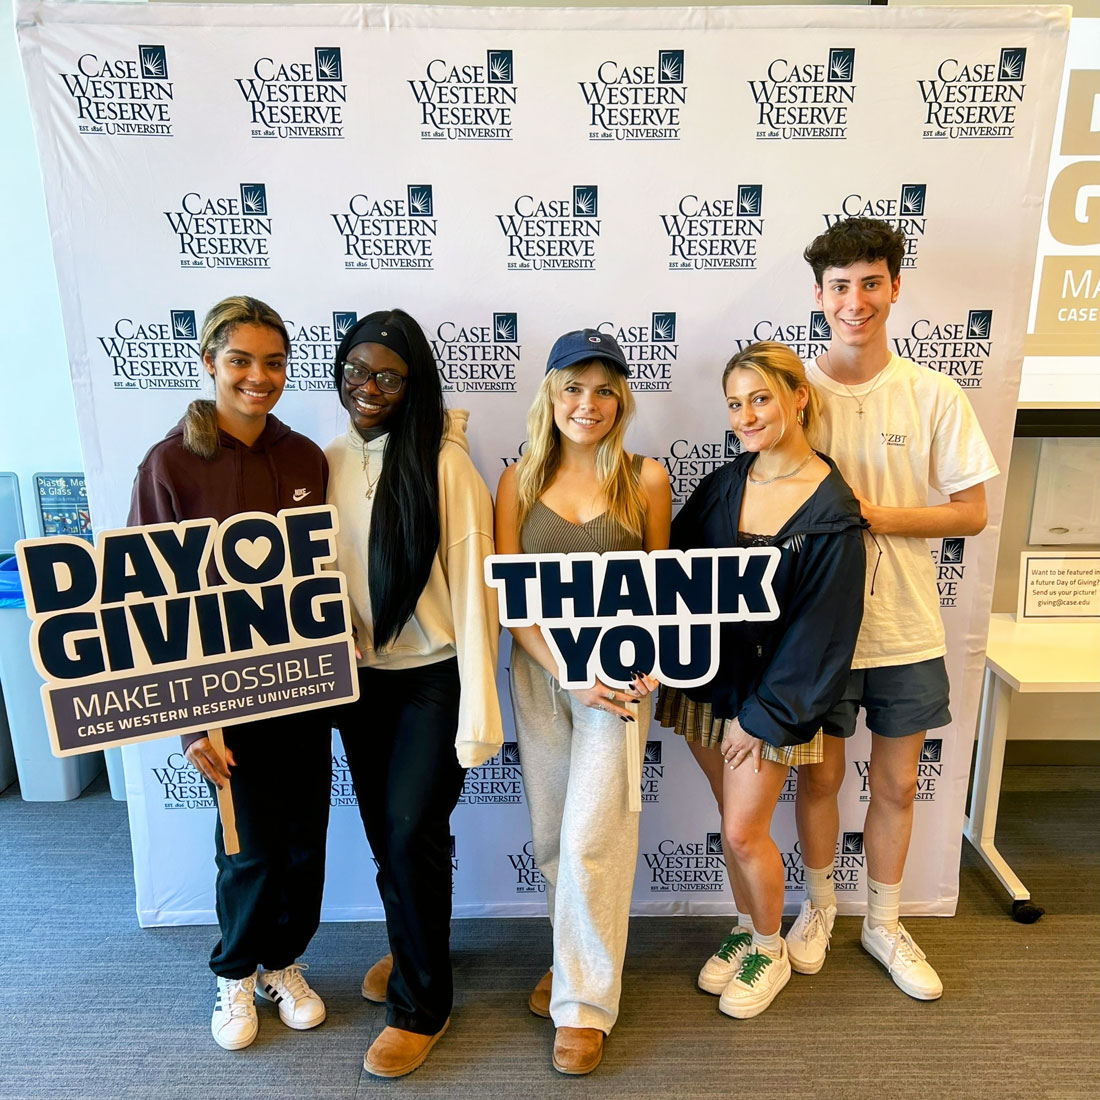 Photo of CWRU students posing for a photo with thank you and day of giving signs